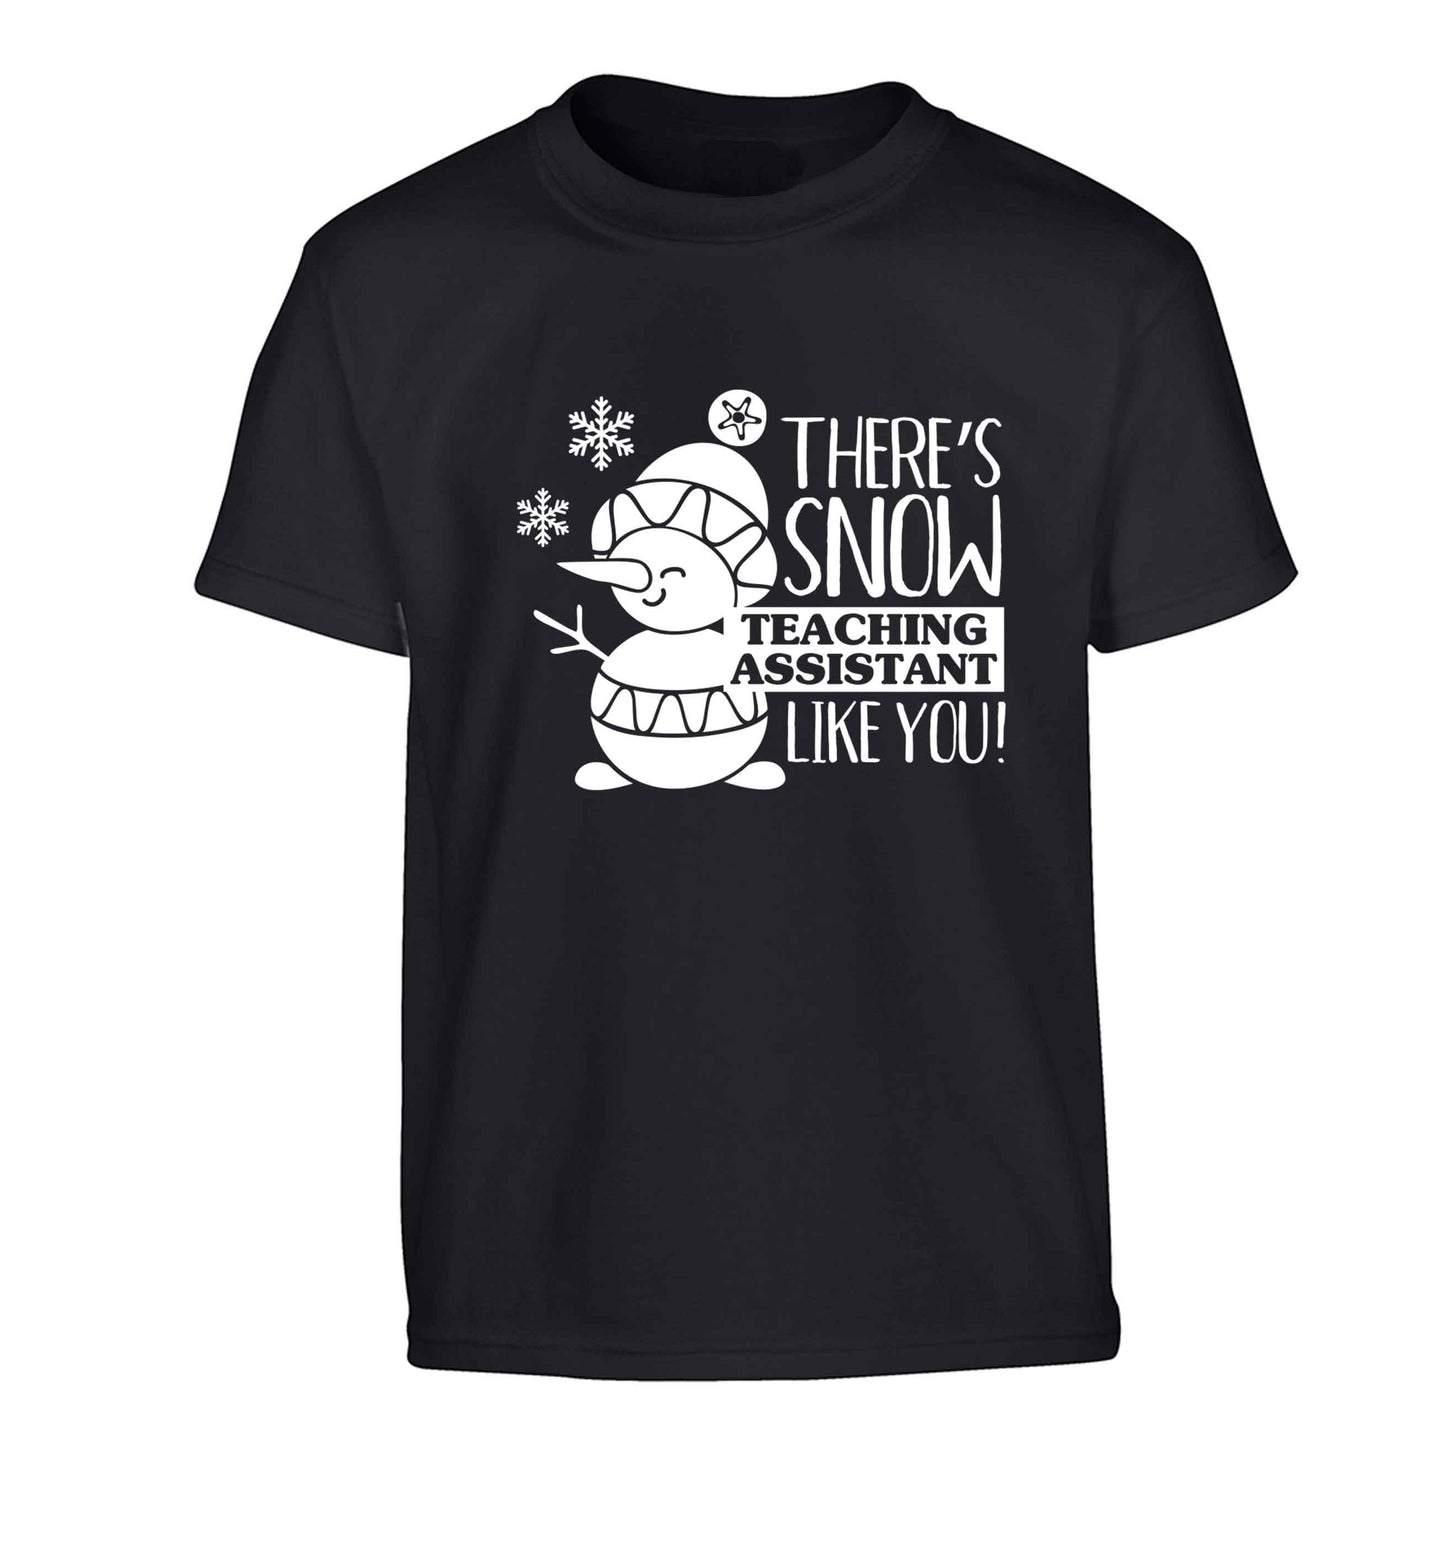 There's snow teaching assistant like you Children's black Tshirt 12-13 Years